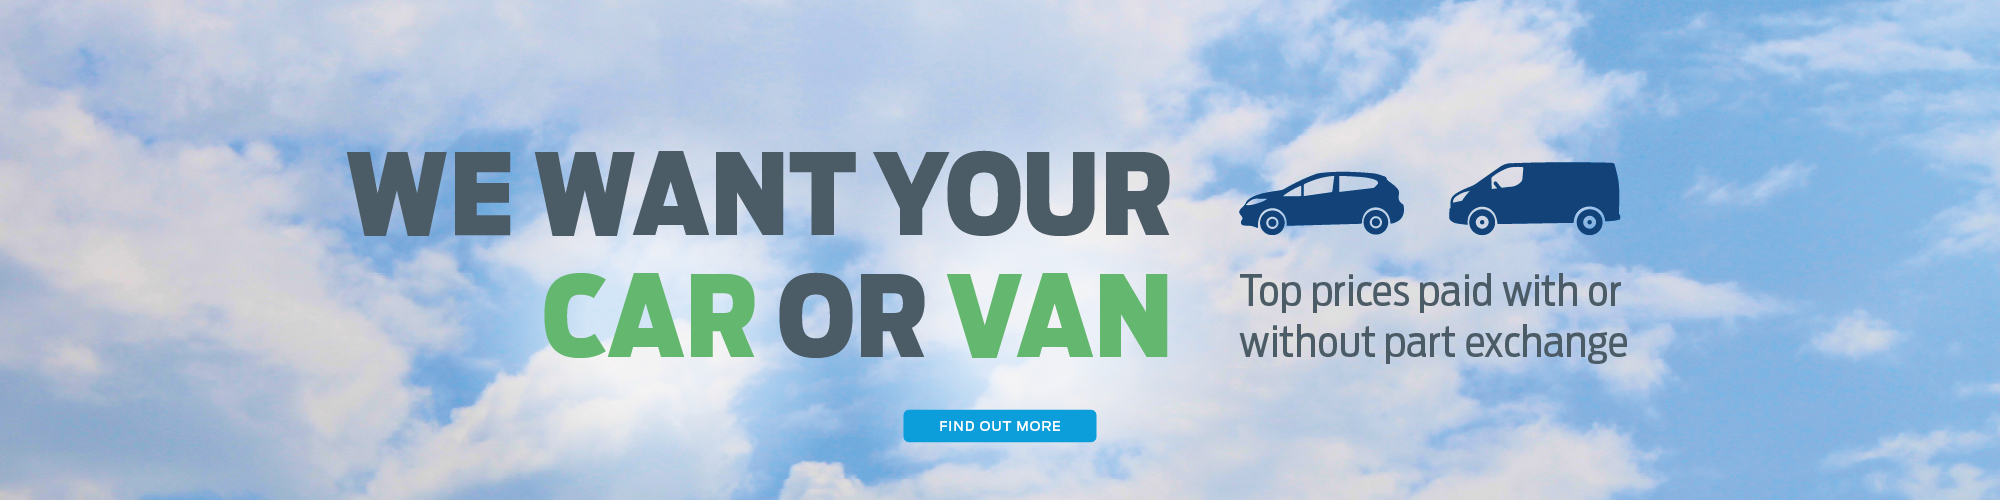 We want your van or car